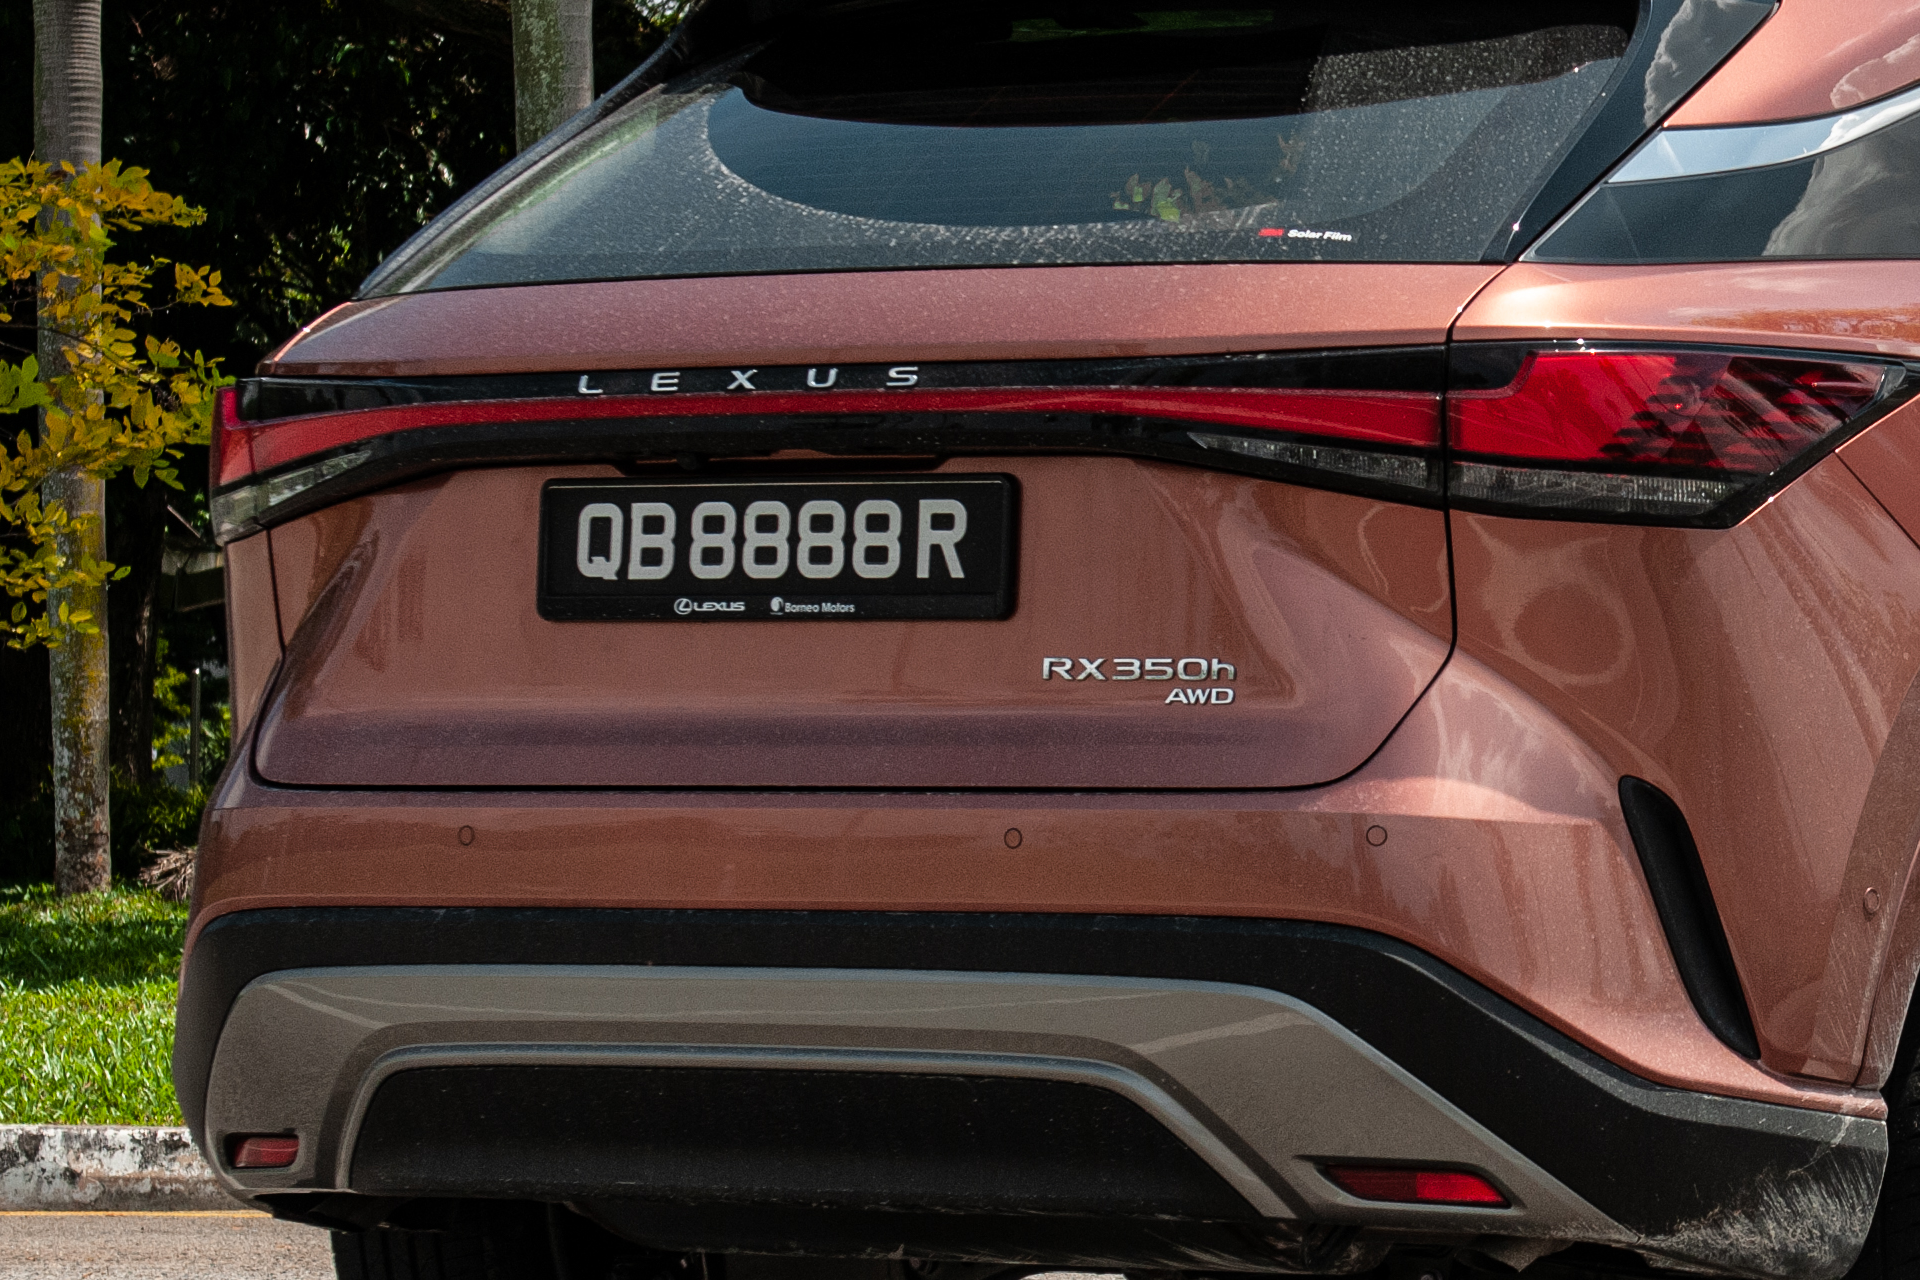 Rear of Lexus RX 350h with a Singapore Q plate